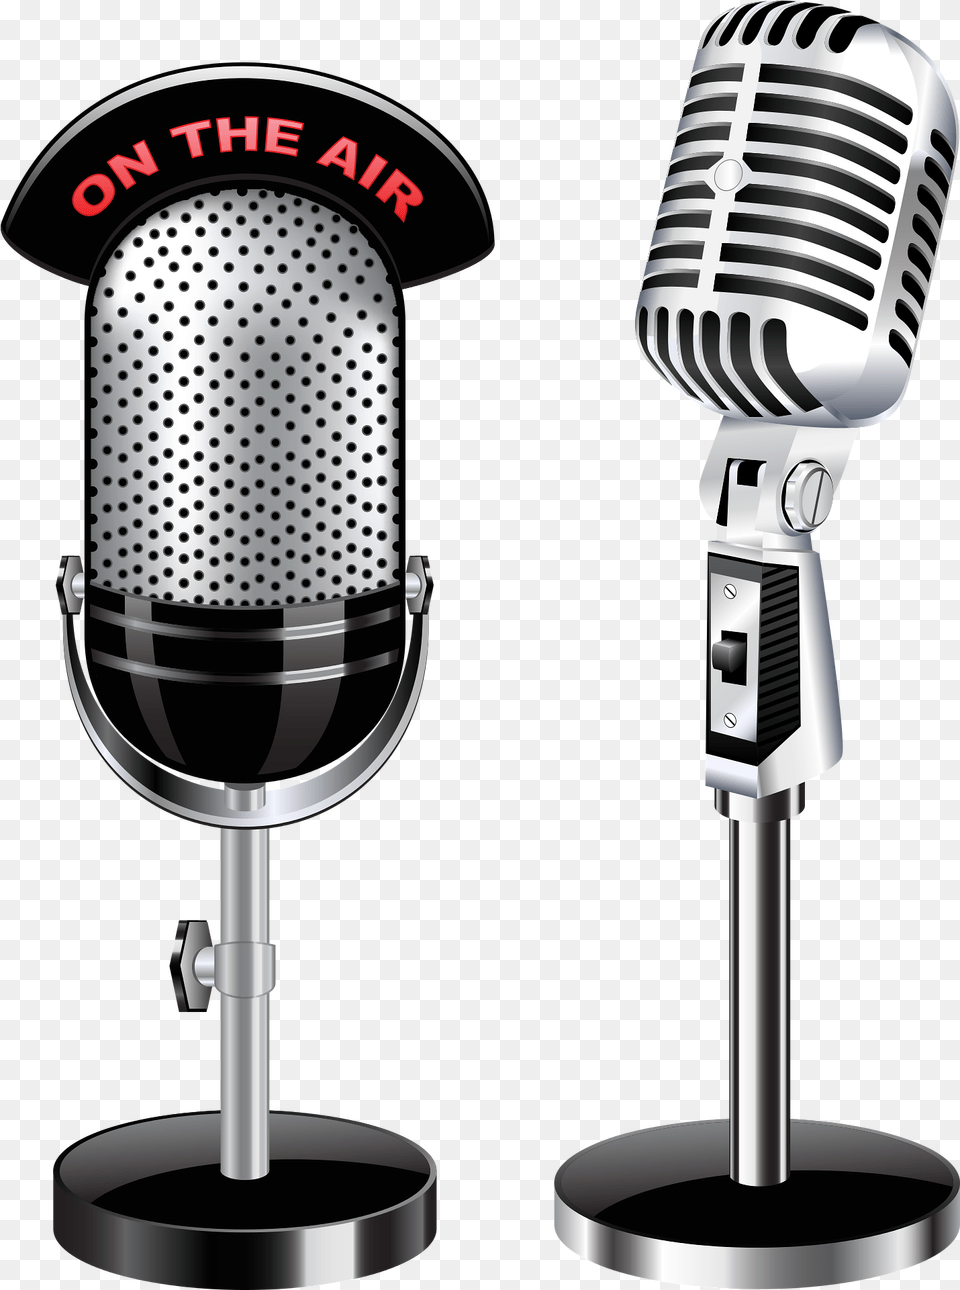 Download Hd Free Transparent Background Old Microphone, Electrical Device, Bathroom, Indoors, Room Png